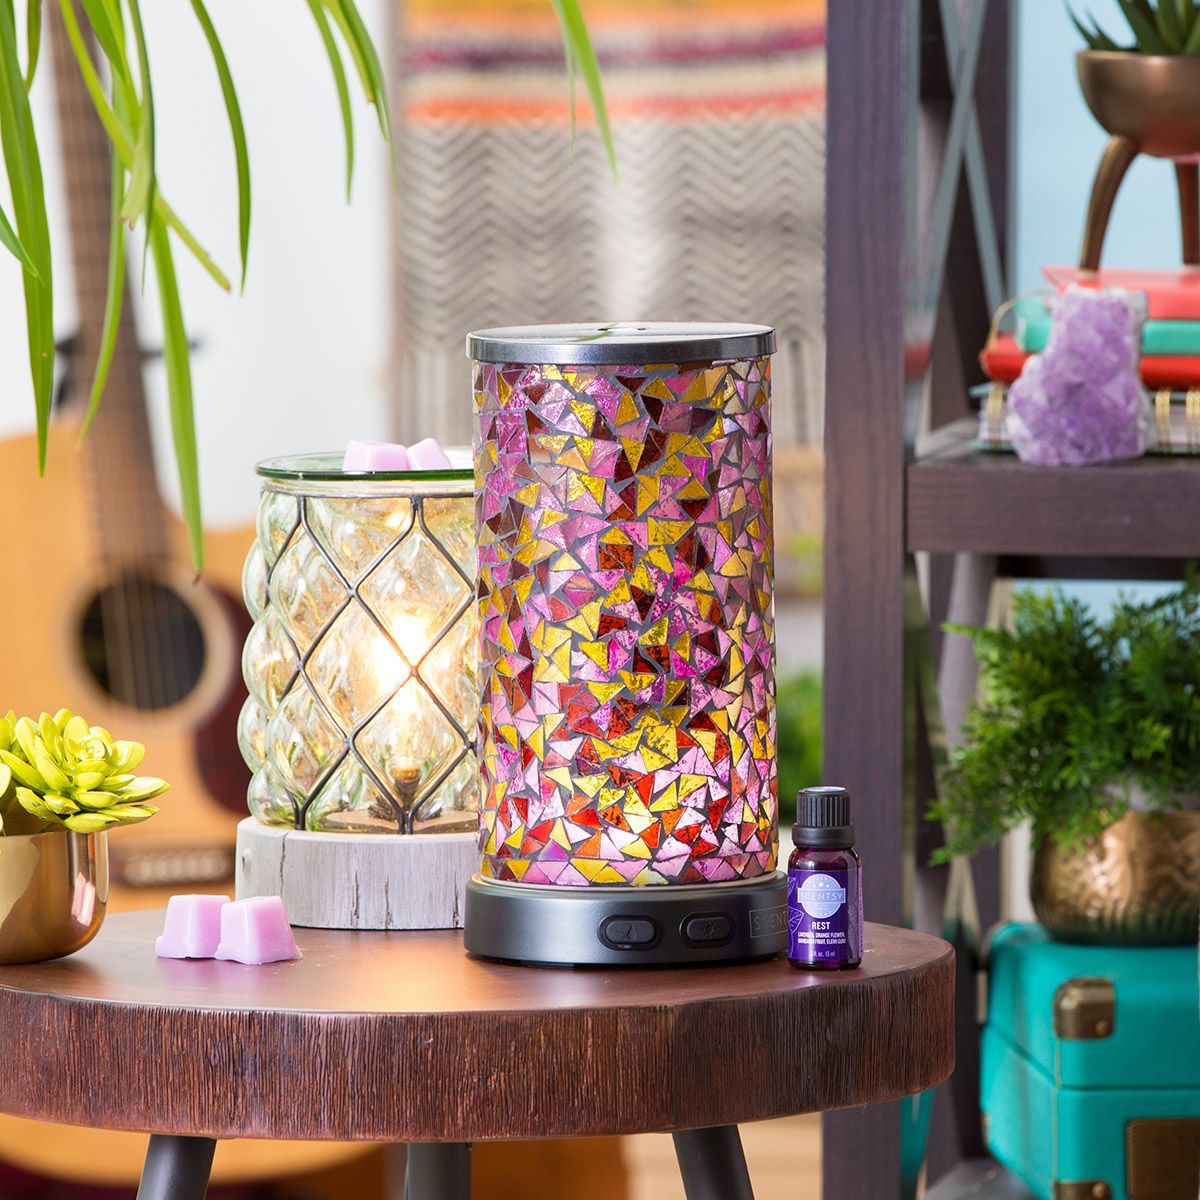 15 Nice Starburst Vase Diffuser Reviews 2024 free download starburst vase diffuser reviews of the stunning stained glass effect of teh new entice diffuser and within the stunning stained glass effect of teh new entice diffuser and beautiful bubbled 